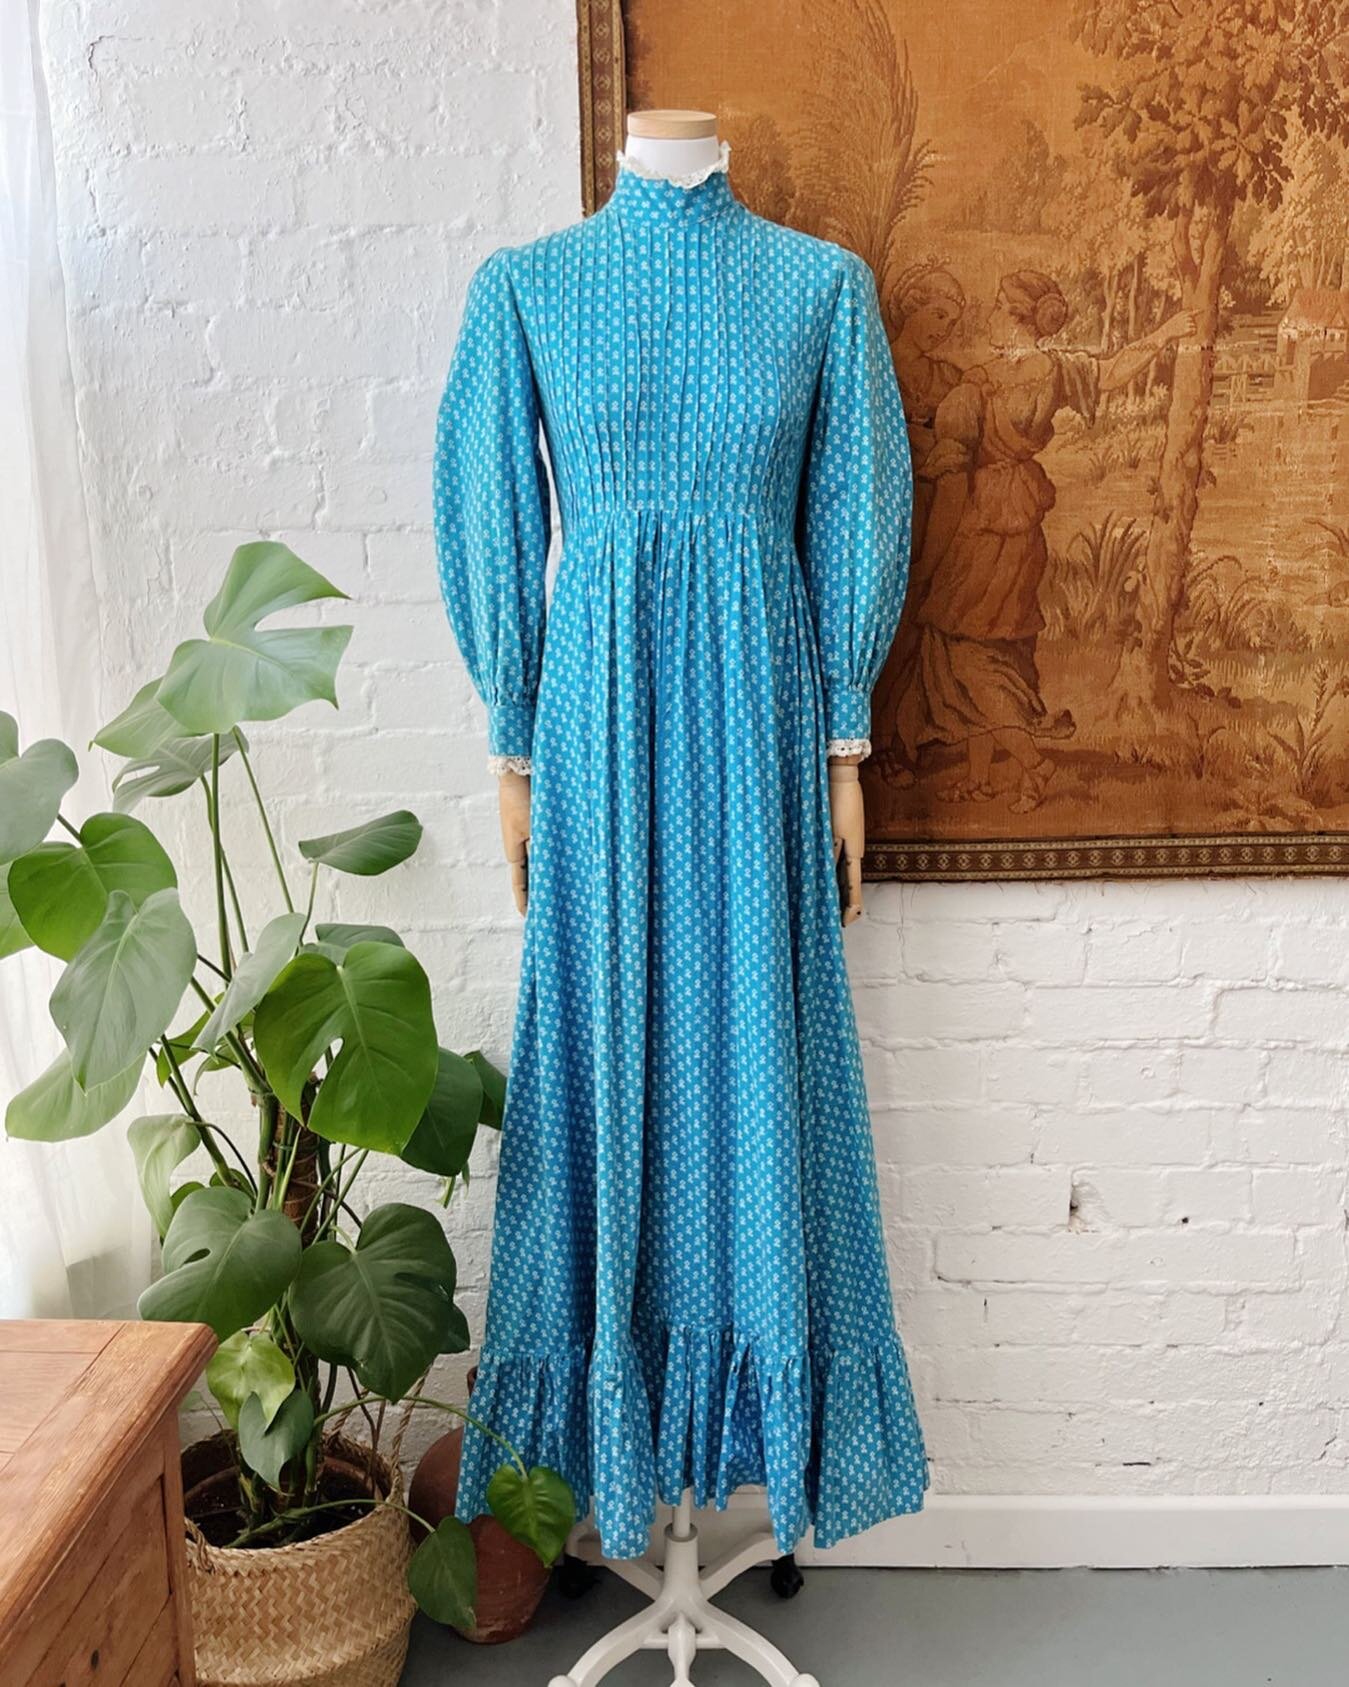 The first of 3 very special Laura Ashley pieces coming soon 🦋 
.
.
#cordialvintage #lauraashley #vintagelauraashley #vintagelauraashleydress #vintagefashion #vintage  #vintagelauraashleyforsale #lauraashleydress #sustainablefashion #shopsmall #brist